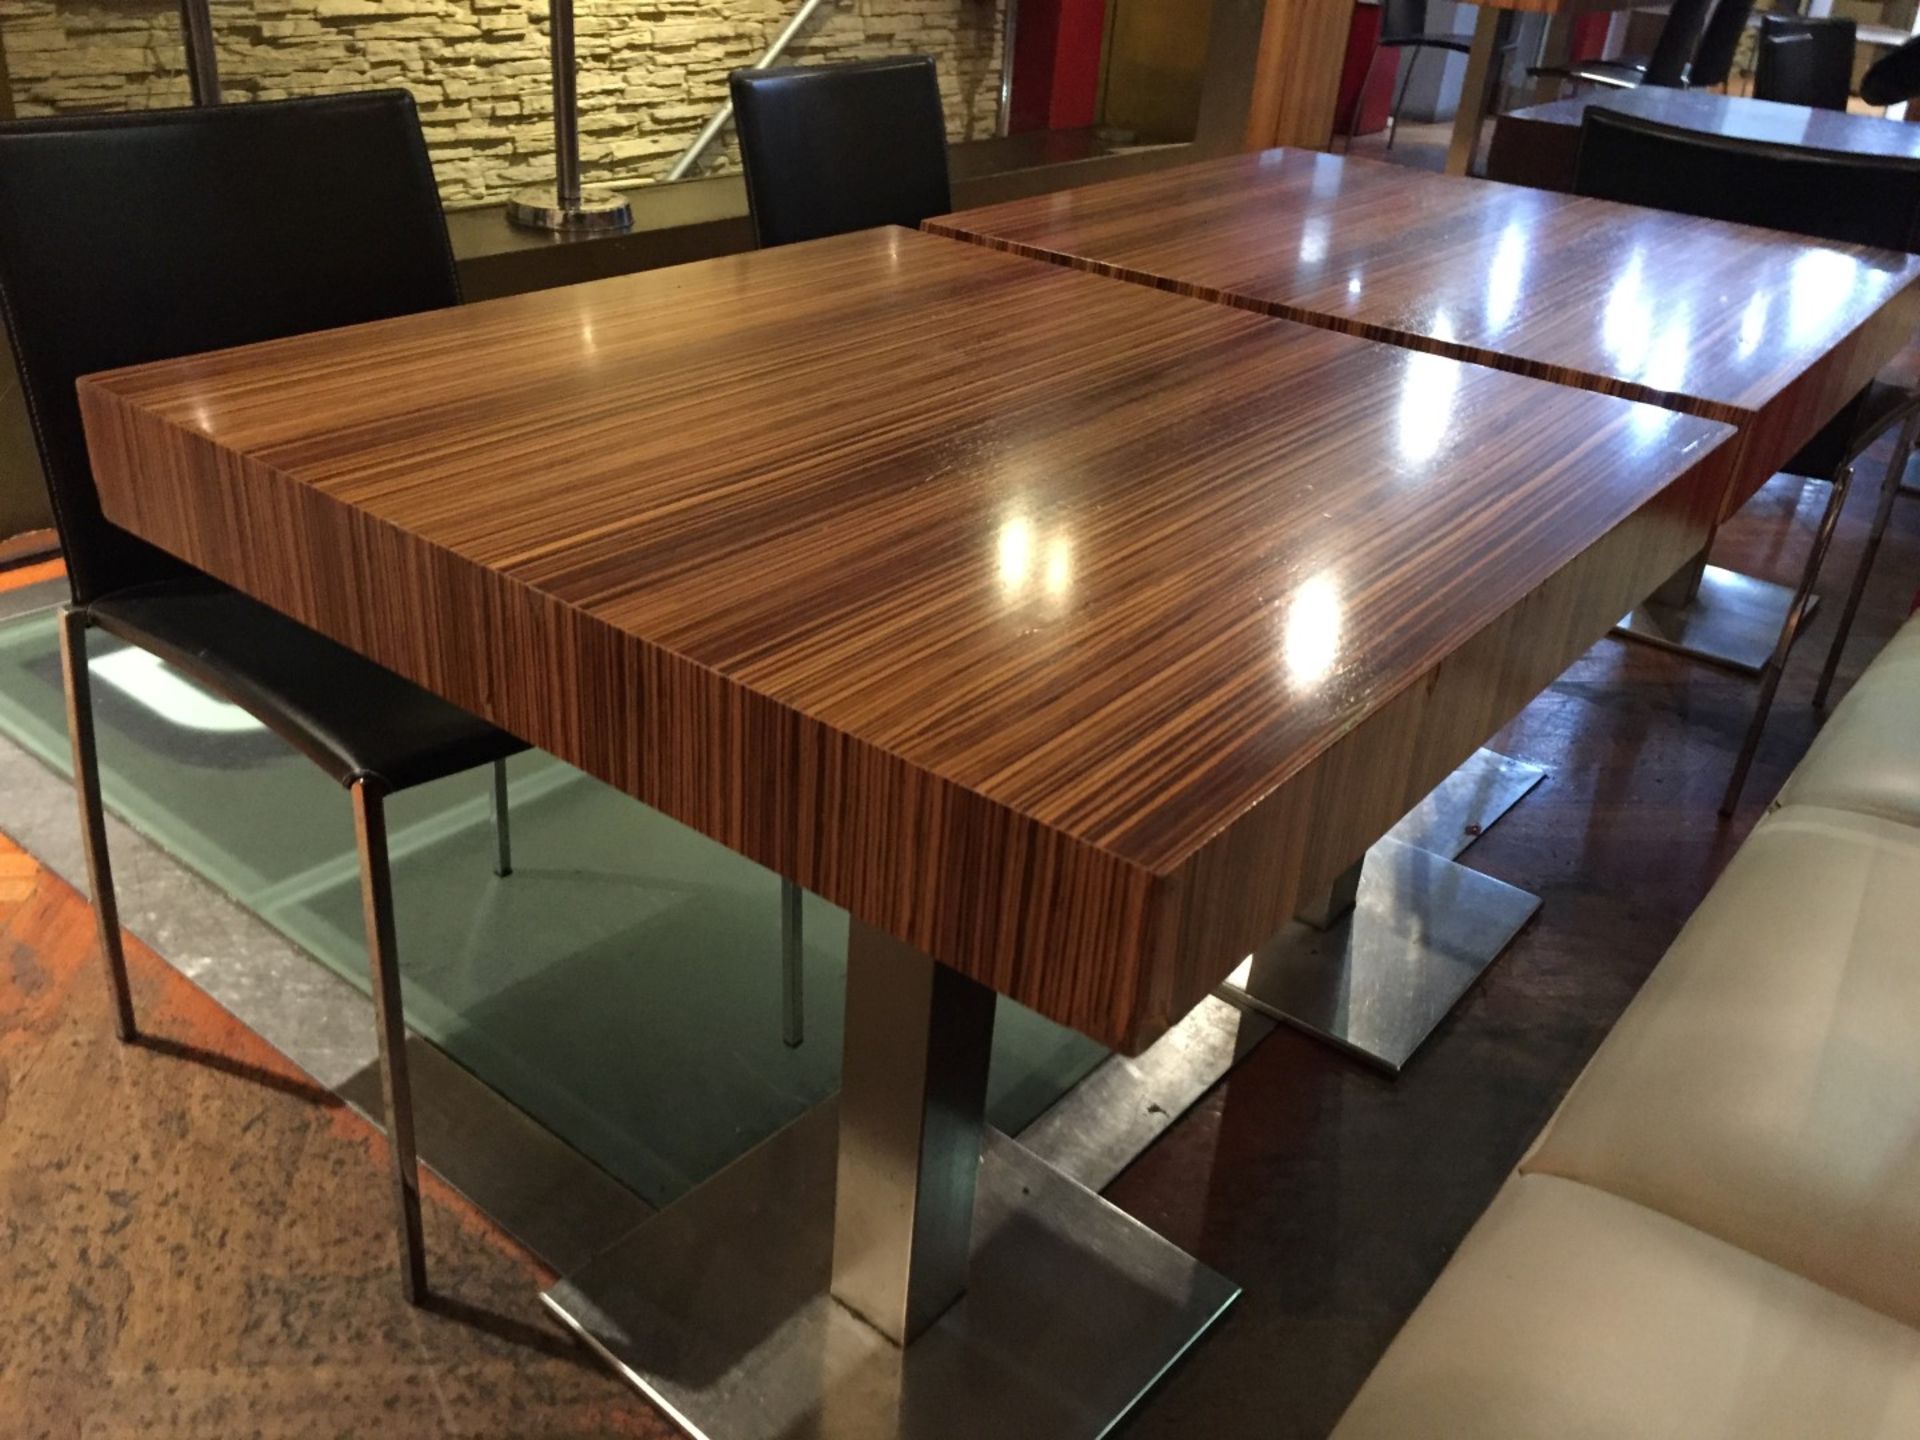 2 x Modern Zebrawood Bistro Tables - Substantial Chrome Base With Zebrawood Tops - H76 x W70 x D70cm - Image 6 of 7